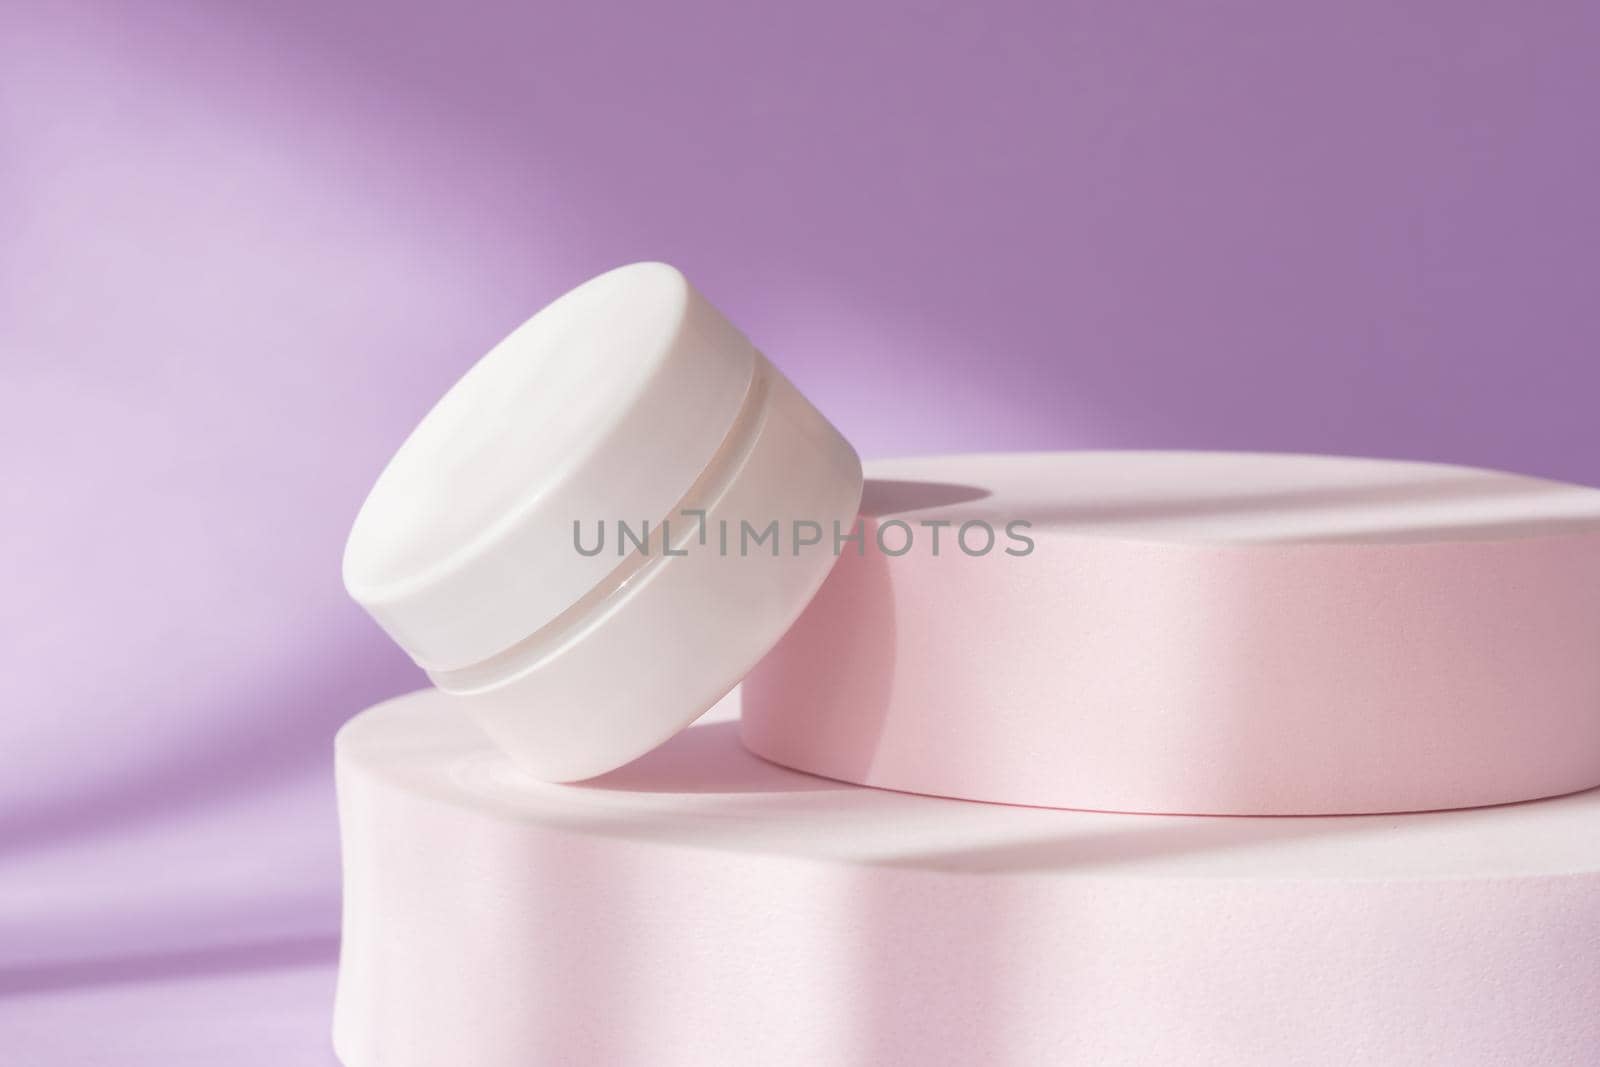 Beauty cosmetic cream jar mockup on purple podium showcase. White package container on pedestal, windows shadow background. Blank skin care product template, luxury skincare body moisturizer by photolime